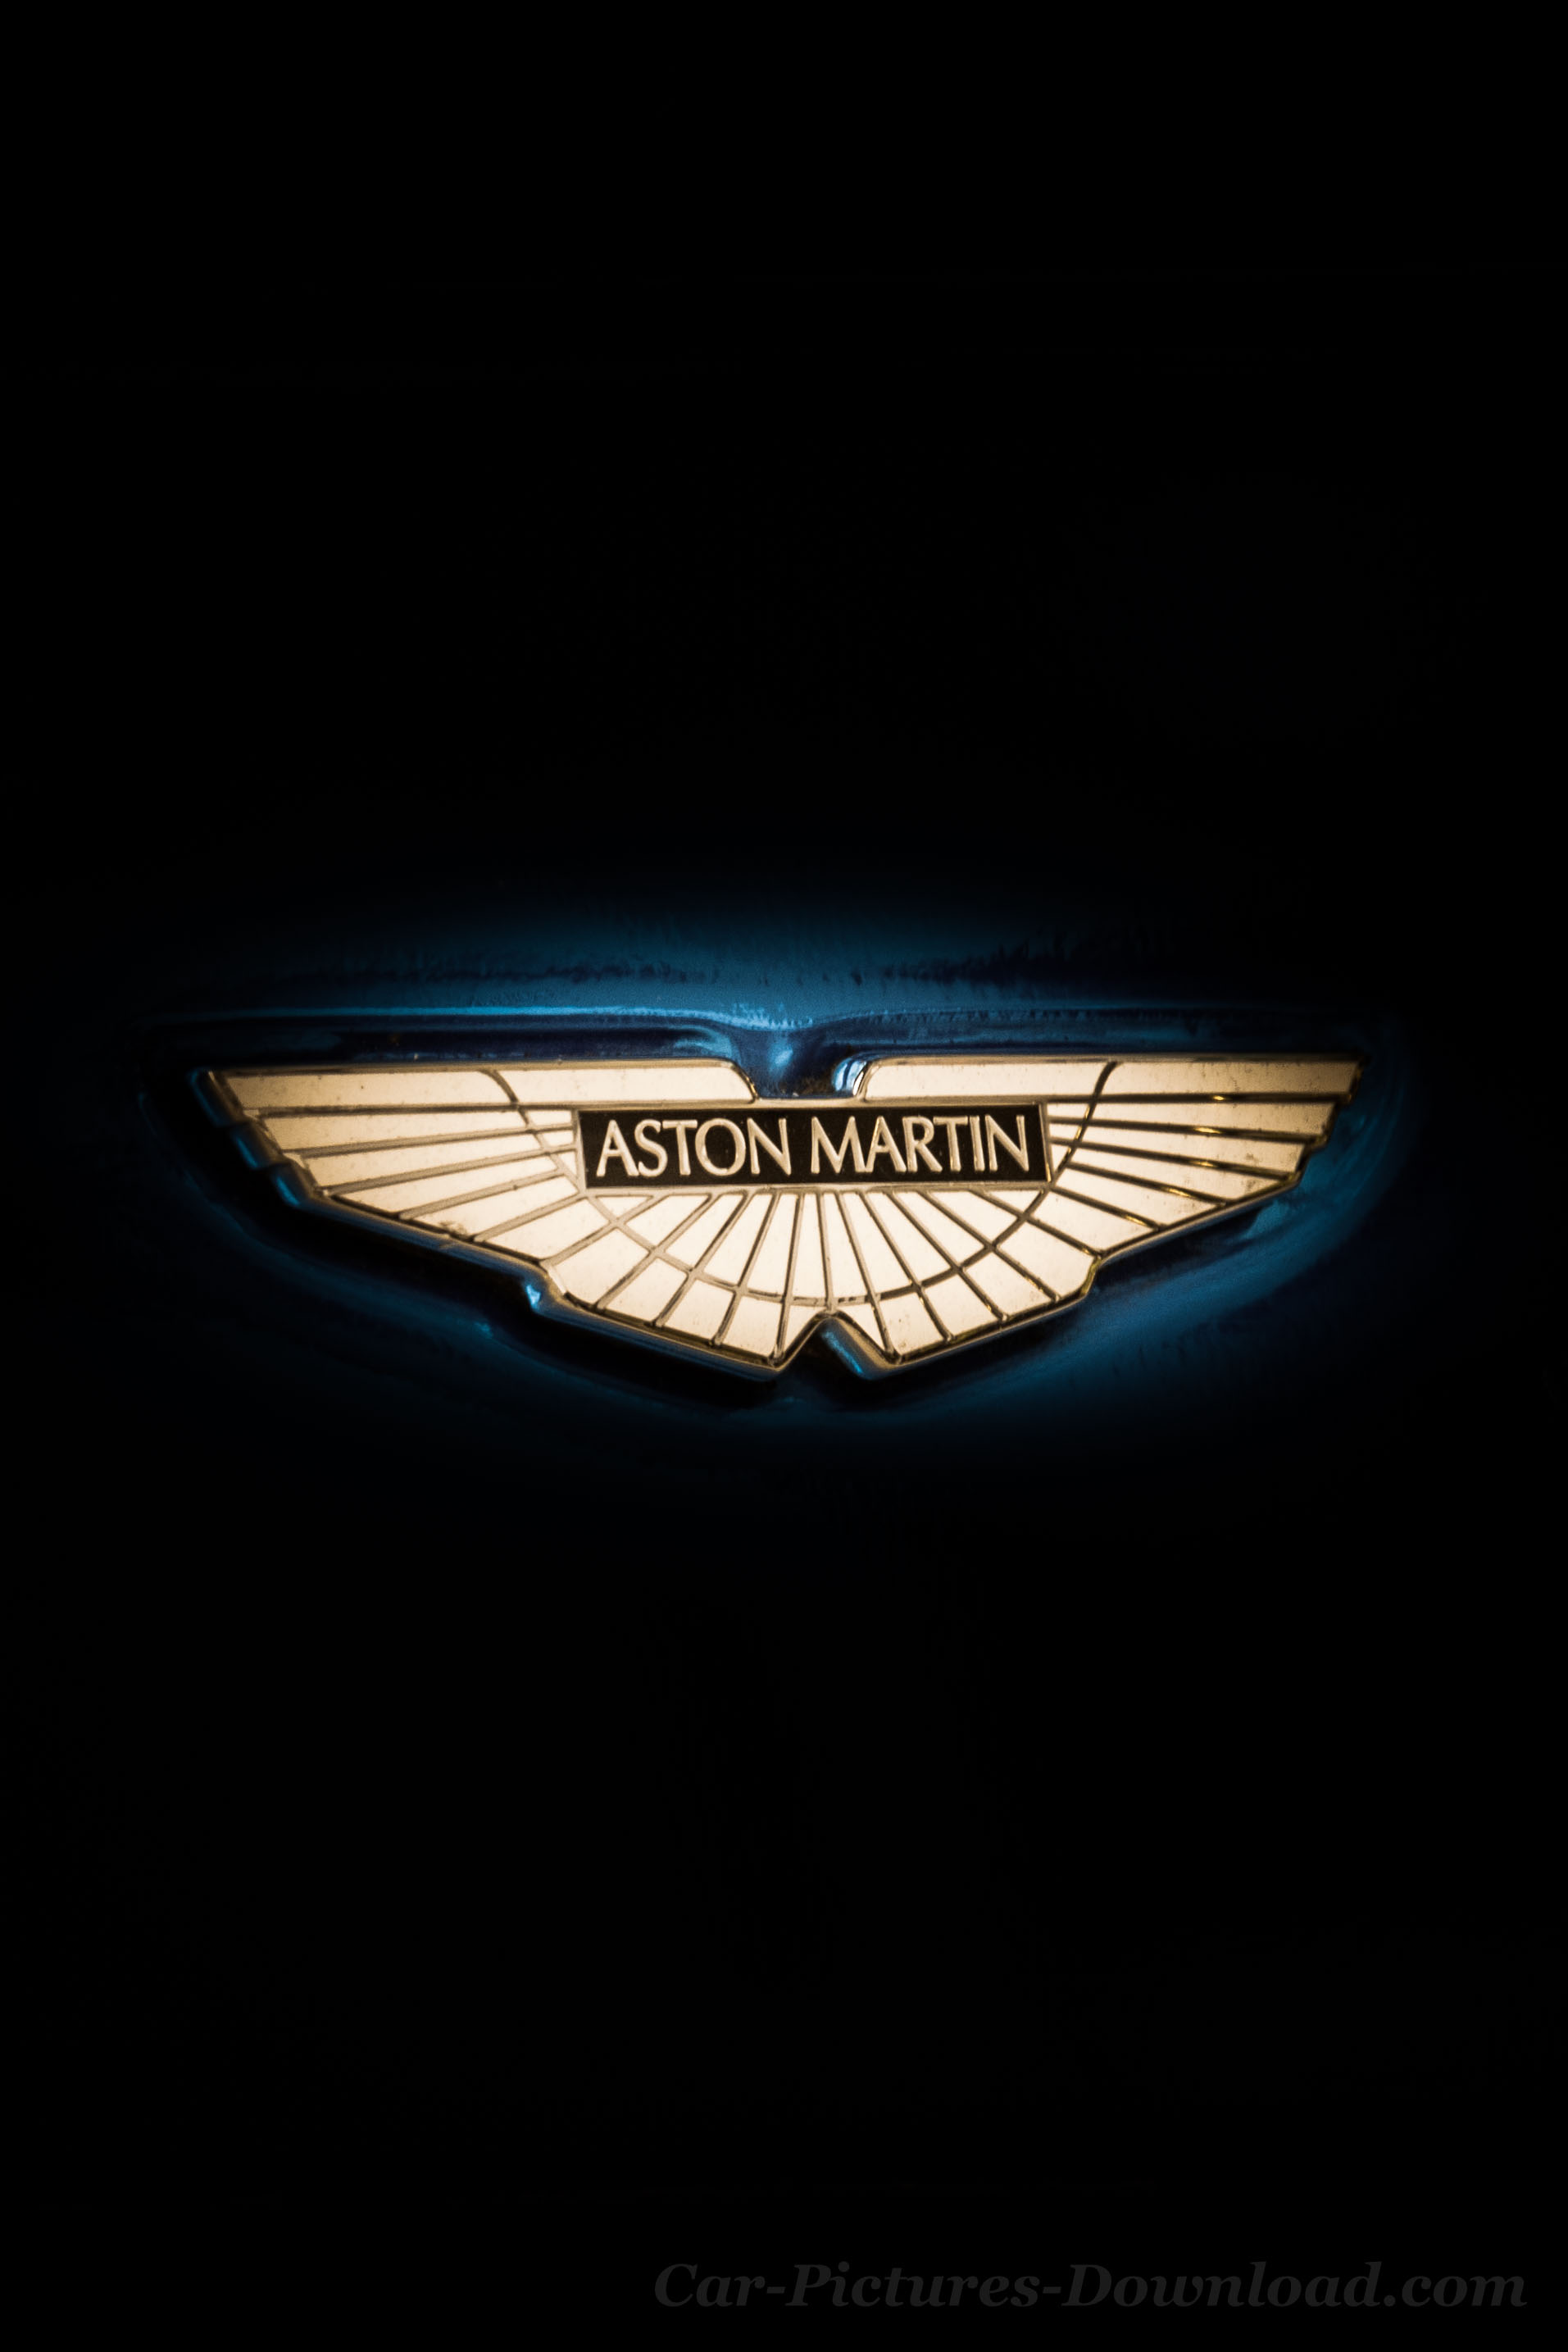 Aston Martin Wallpaper For Pc Mobile To HD Image